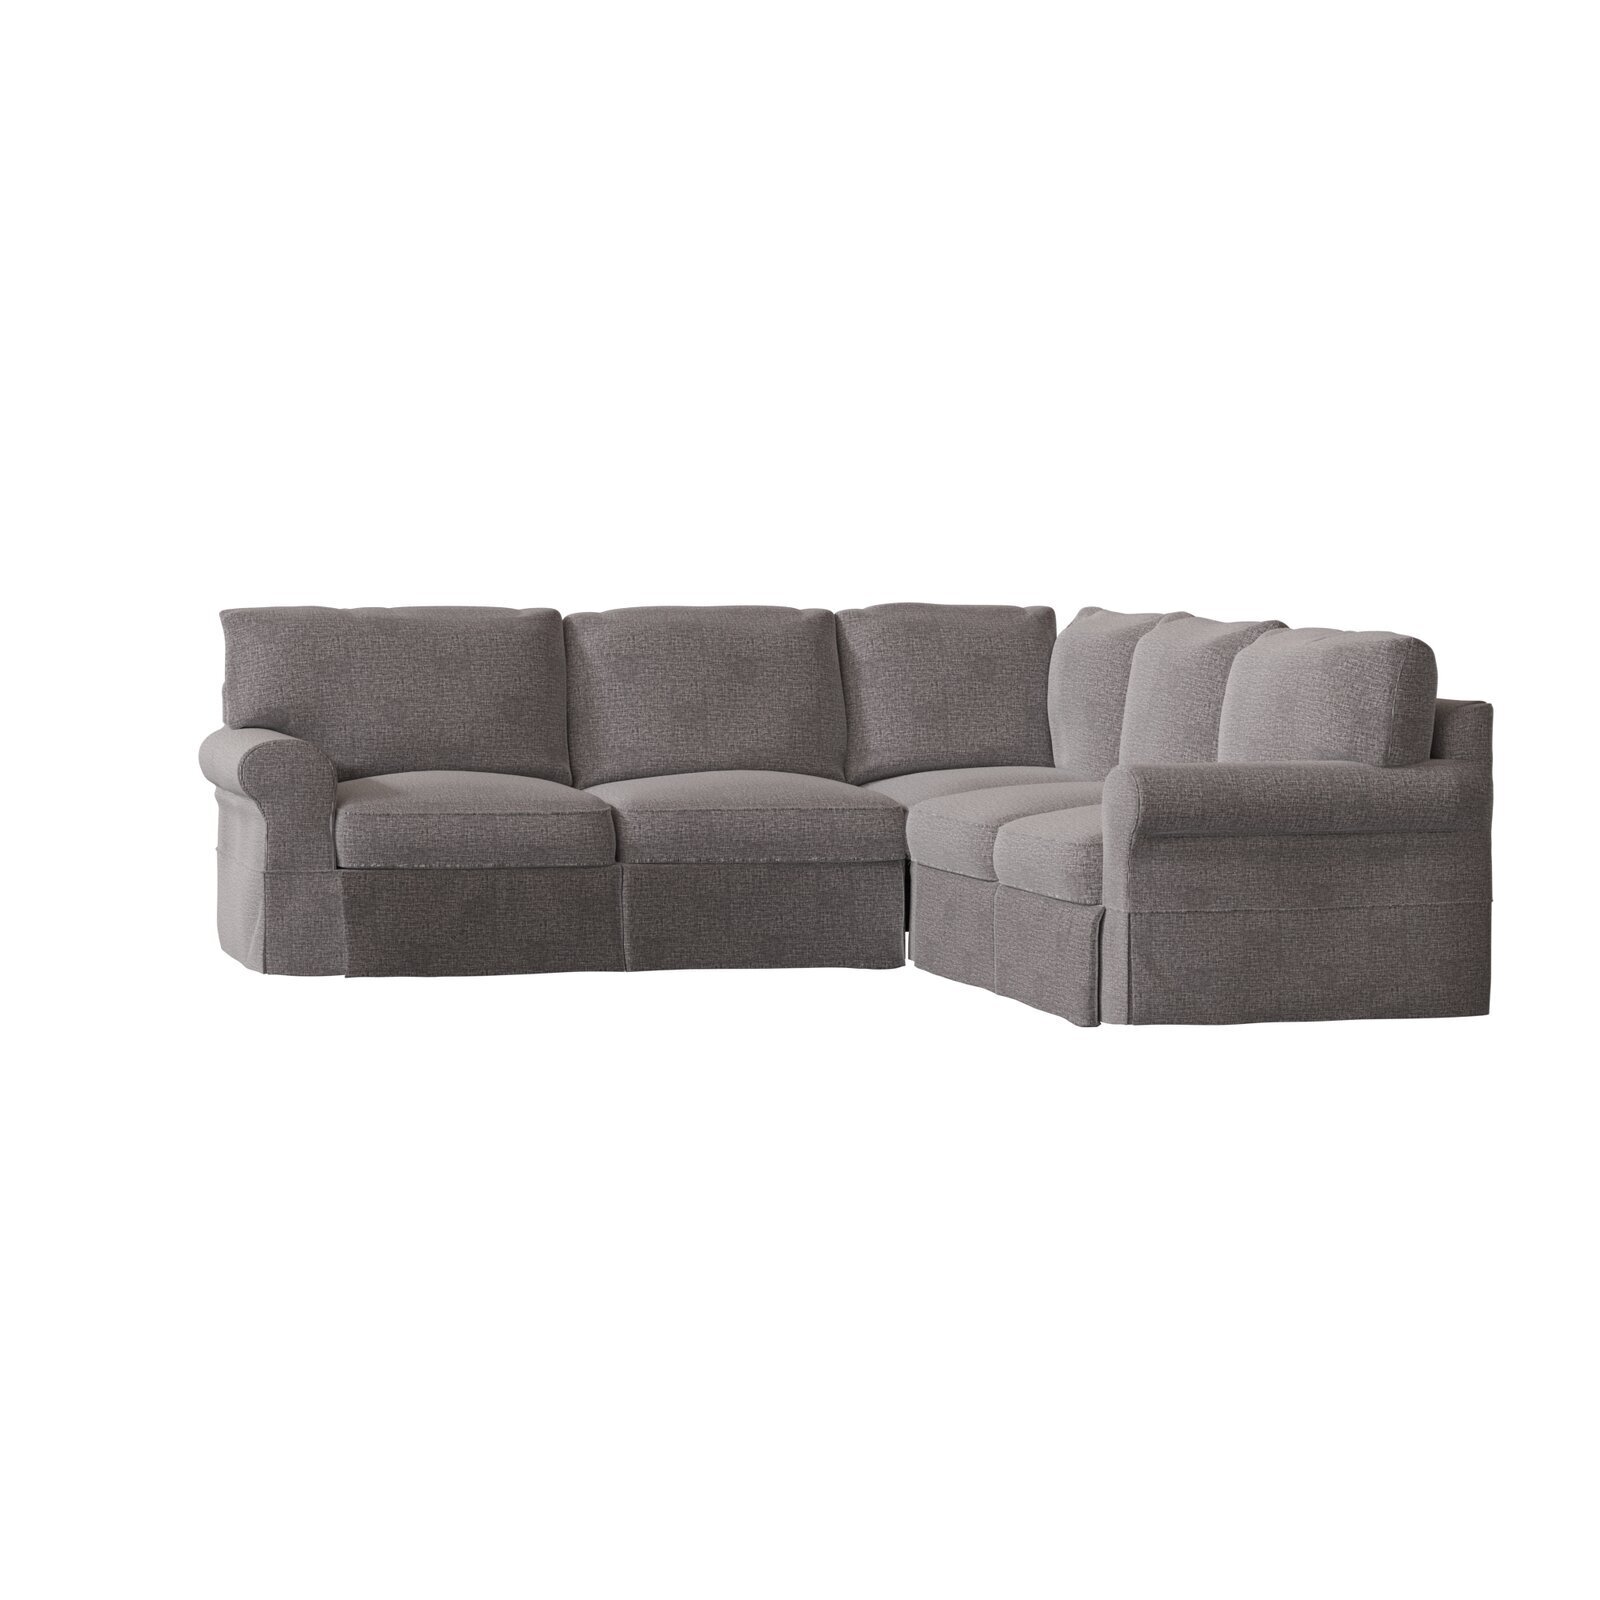 Wide Corner Home Theater Sectional Sofa